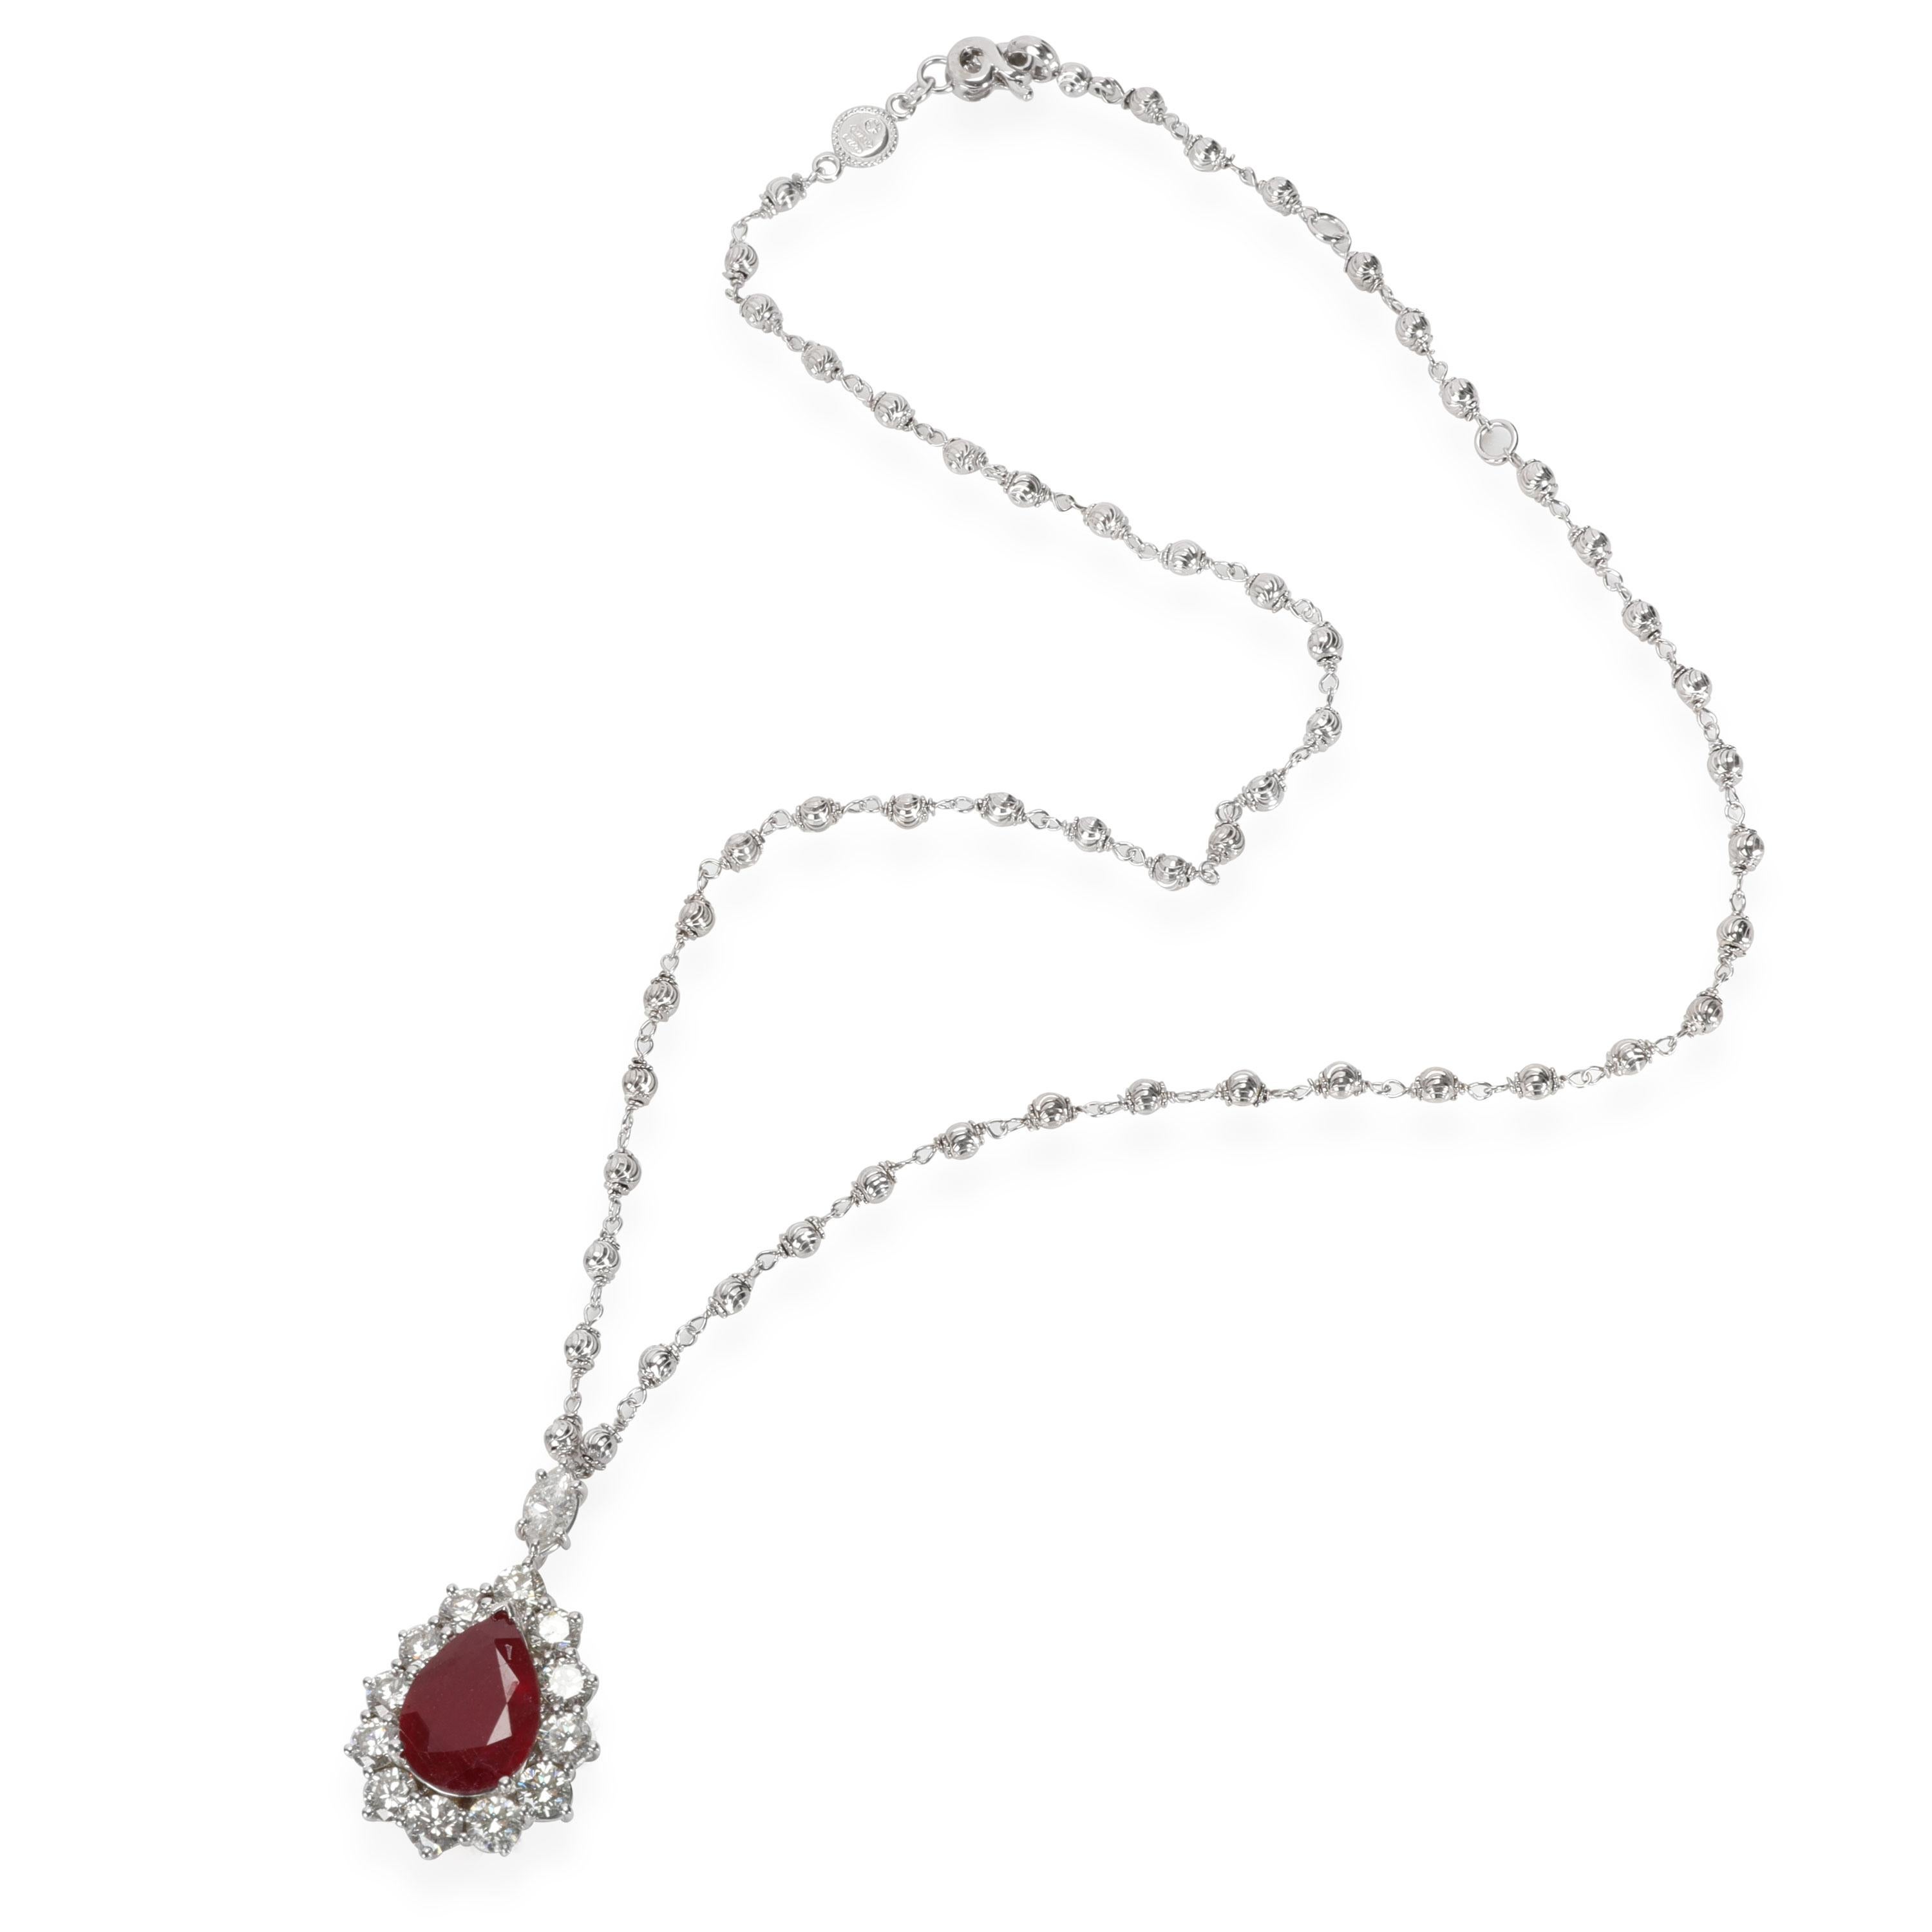 
Diamond & Glass Filled Ruby Necklace in 18K White Gold 3.67 CTW

PRIMARY DETAILS
SKU: 110318
Listing Title: Diamond & Glass Filled Ruby Necklace in 18K White Gold 3.67 CTW
Condition Description: Retails for 5000 USD. In excellent condition and